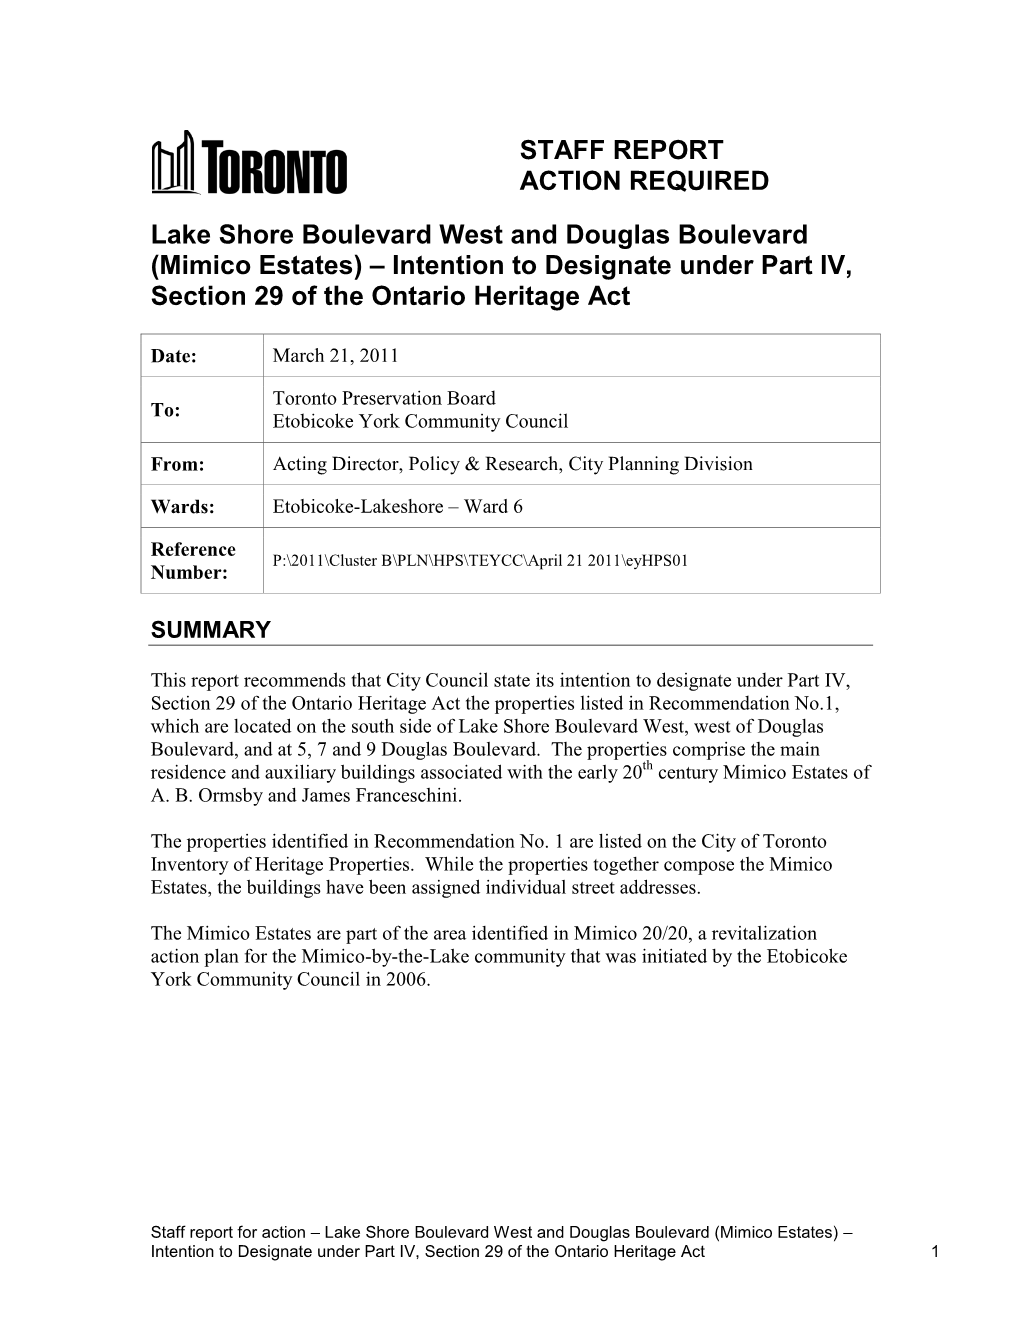 (Mimico Estates) – Intention to Designate Under Part IV, Section 29 of the Ontario Heritage Act